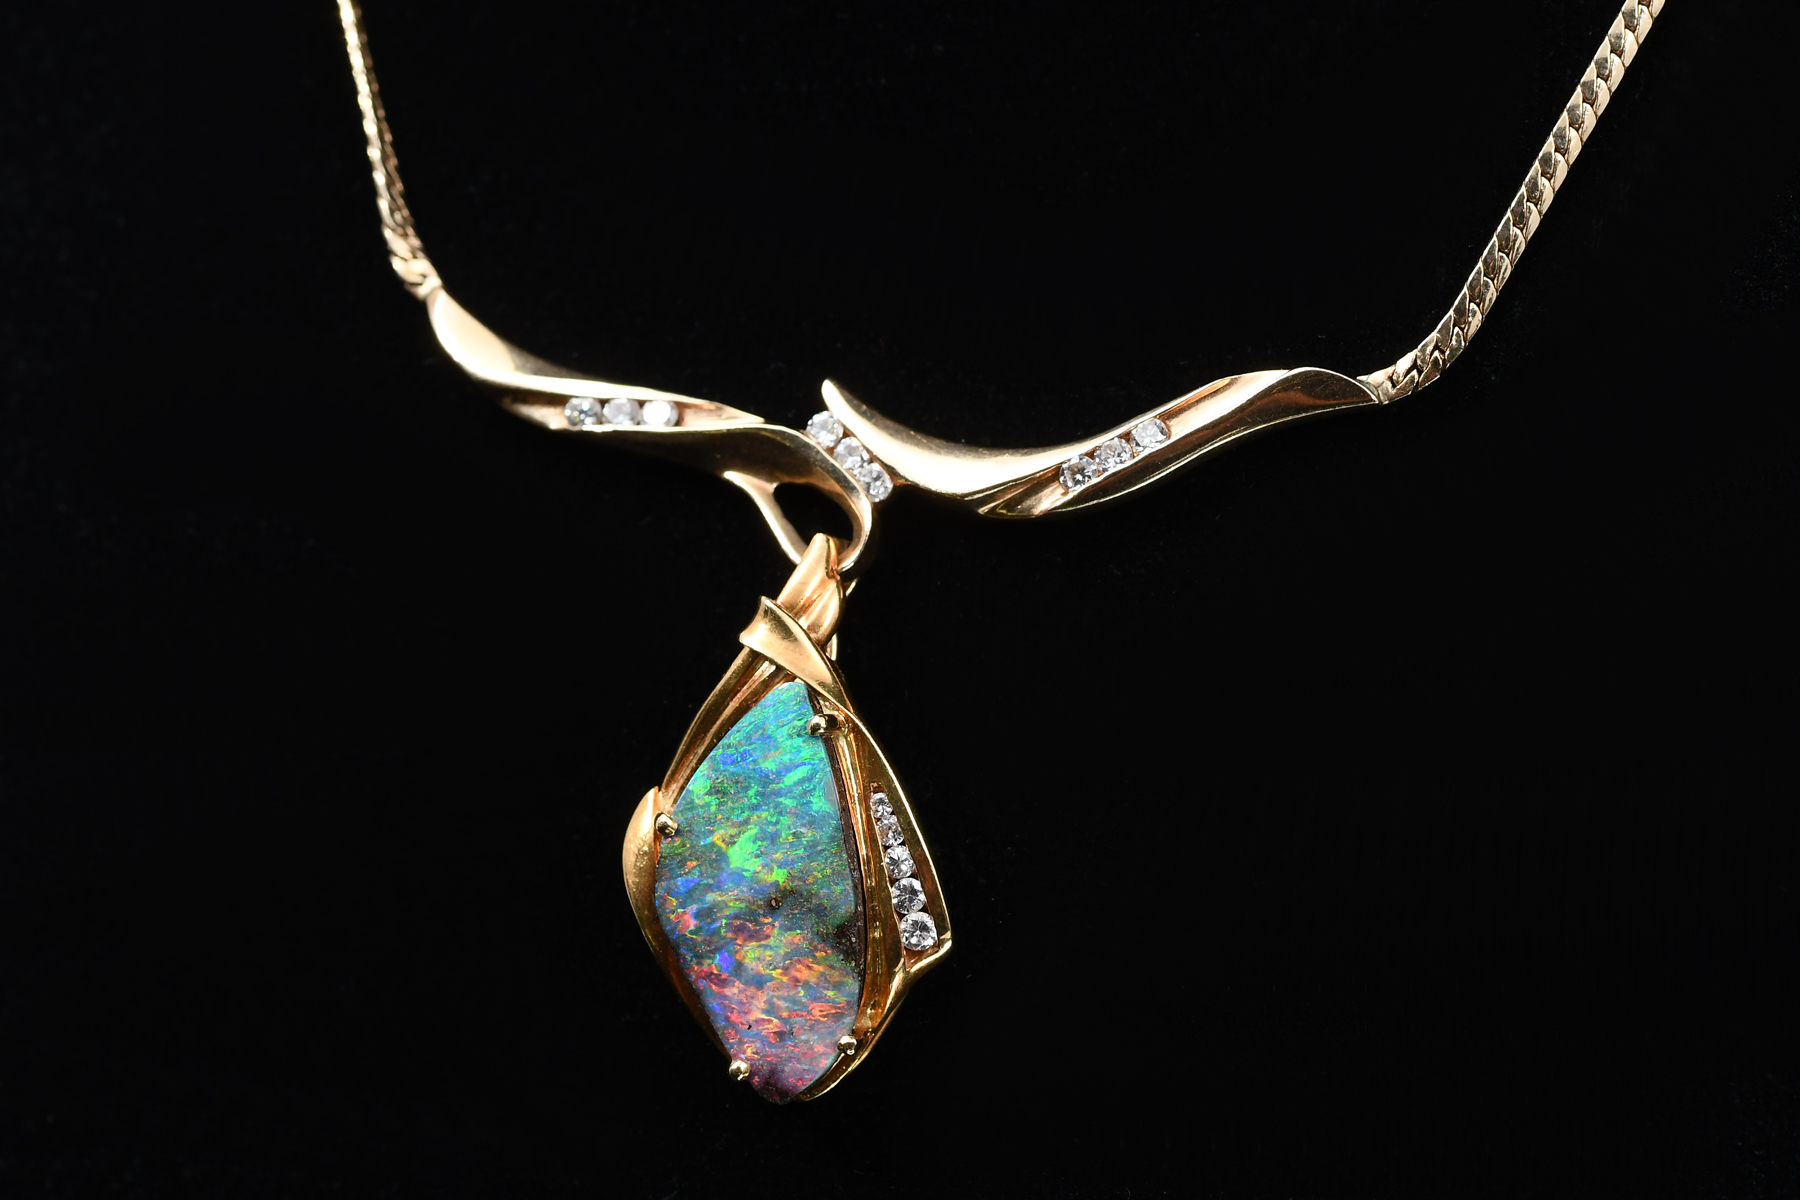 14K GOLD, DIAMOND, AND OPAL NECKLACE: